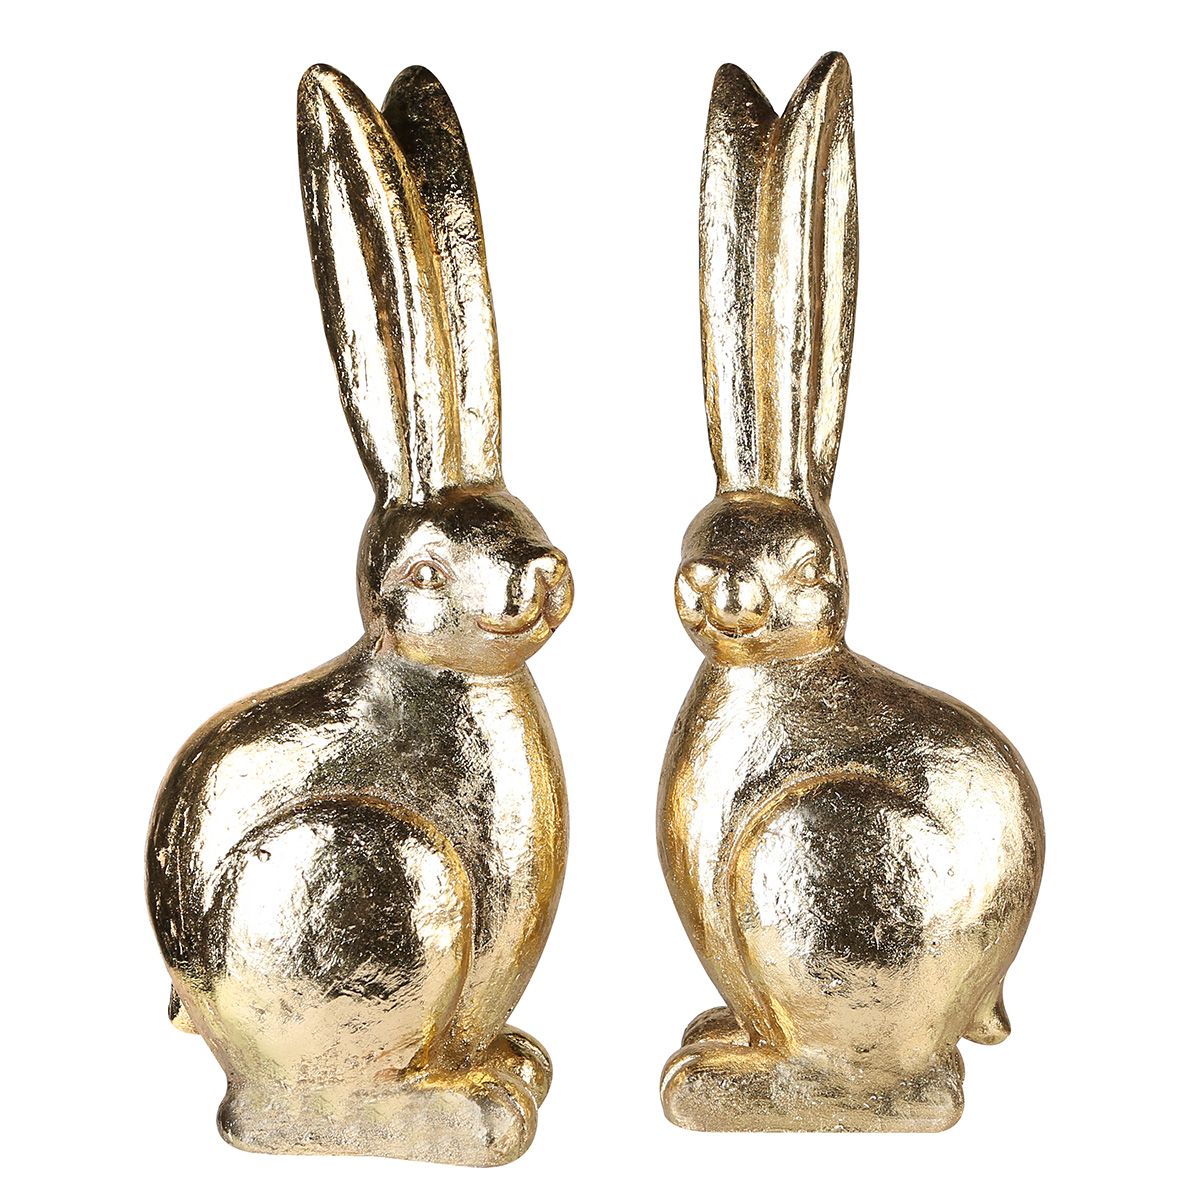 Goldhase (Rechts)